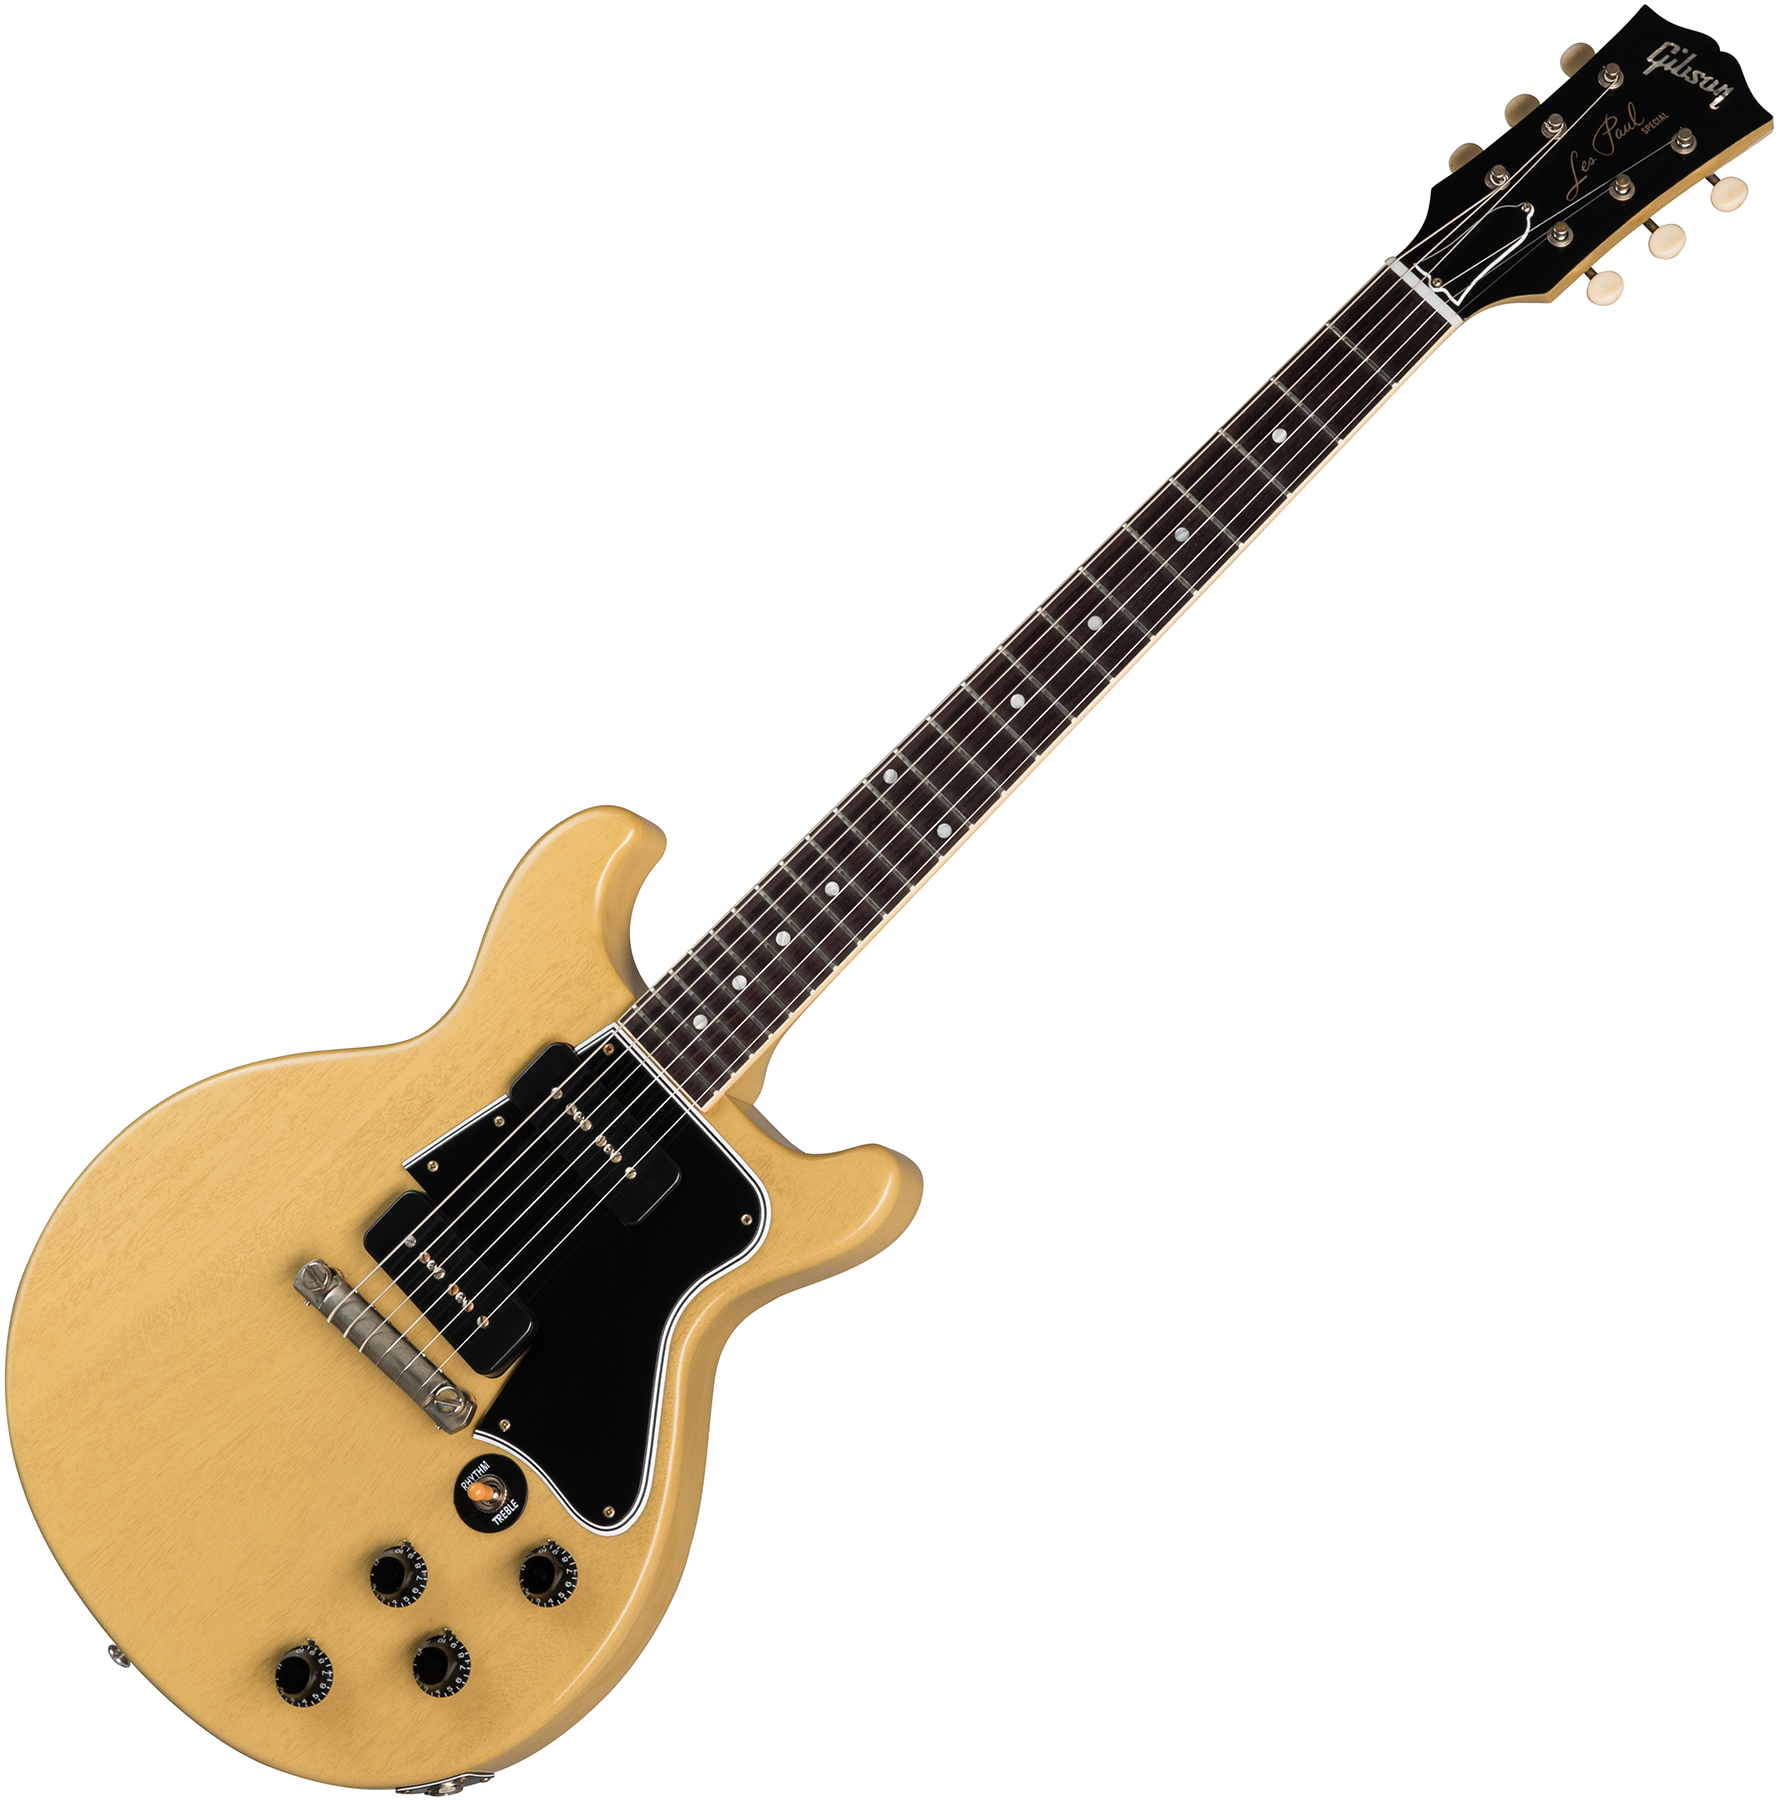 Gibson Custom Shop 1960 Les Paul Special Double Cut Reissue 19 Vos Tv Yellow Solid Body Electric Guitar Yellow